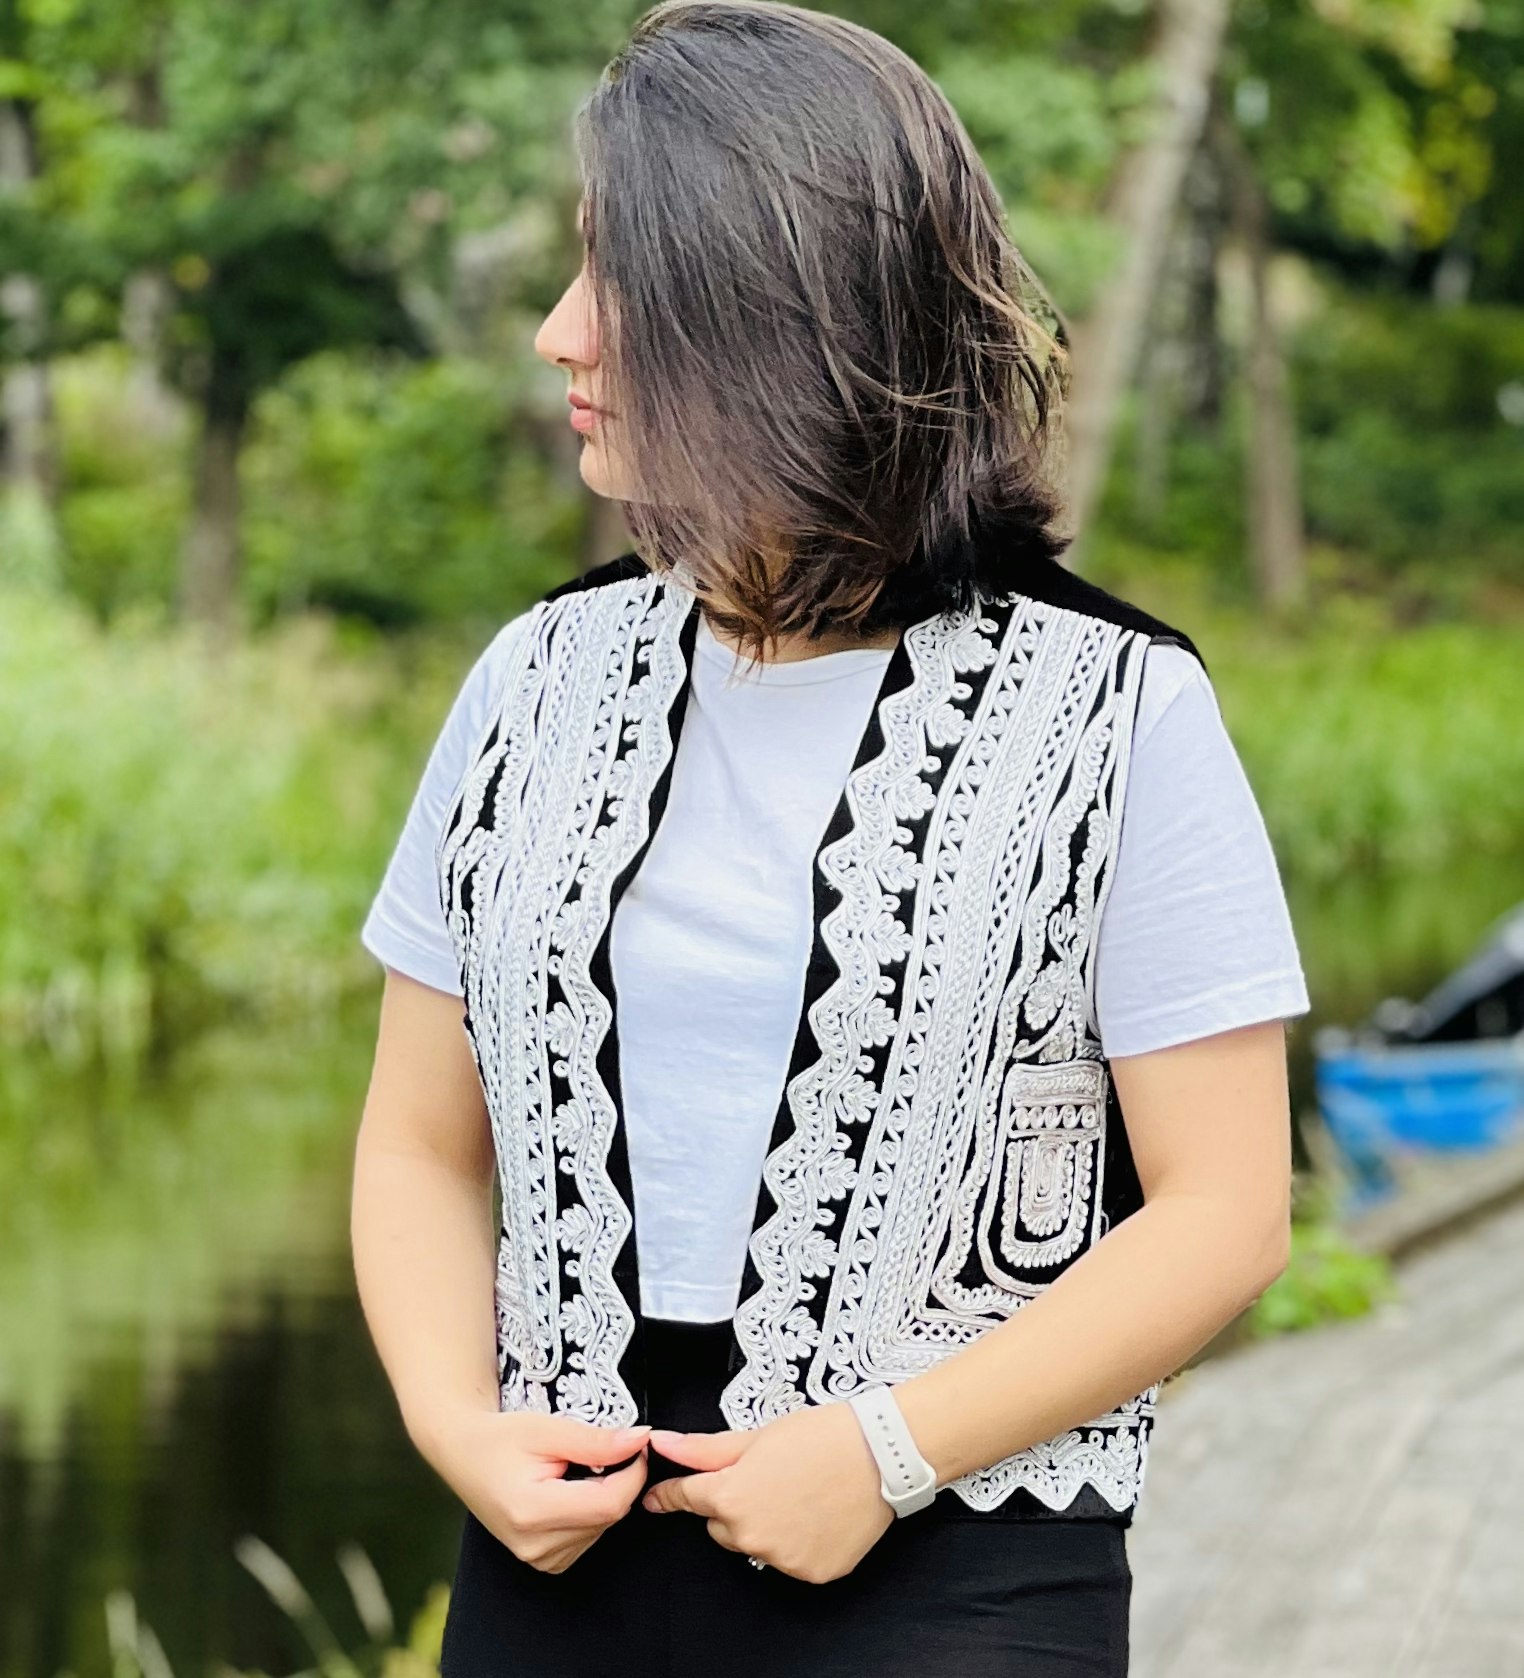 The vest is made from high-quality velvet fabric, decorated with intricate floral patterns & motifs. Hand-crafted using metallic silver threads & braid.